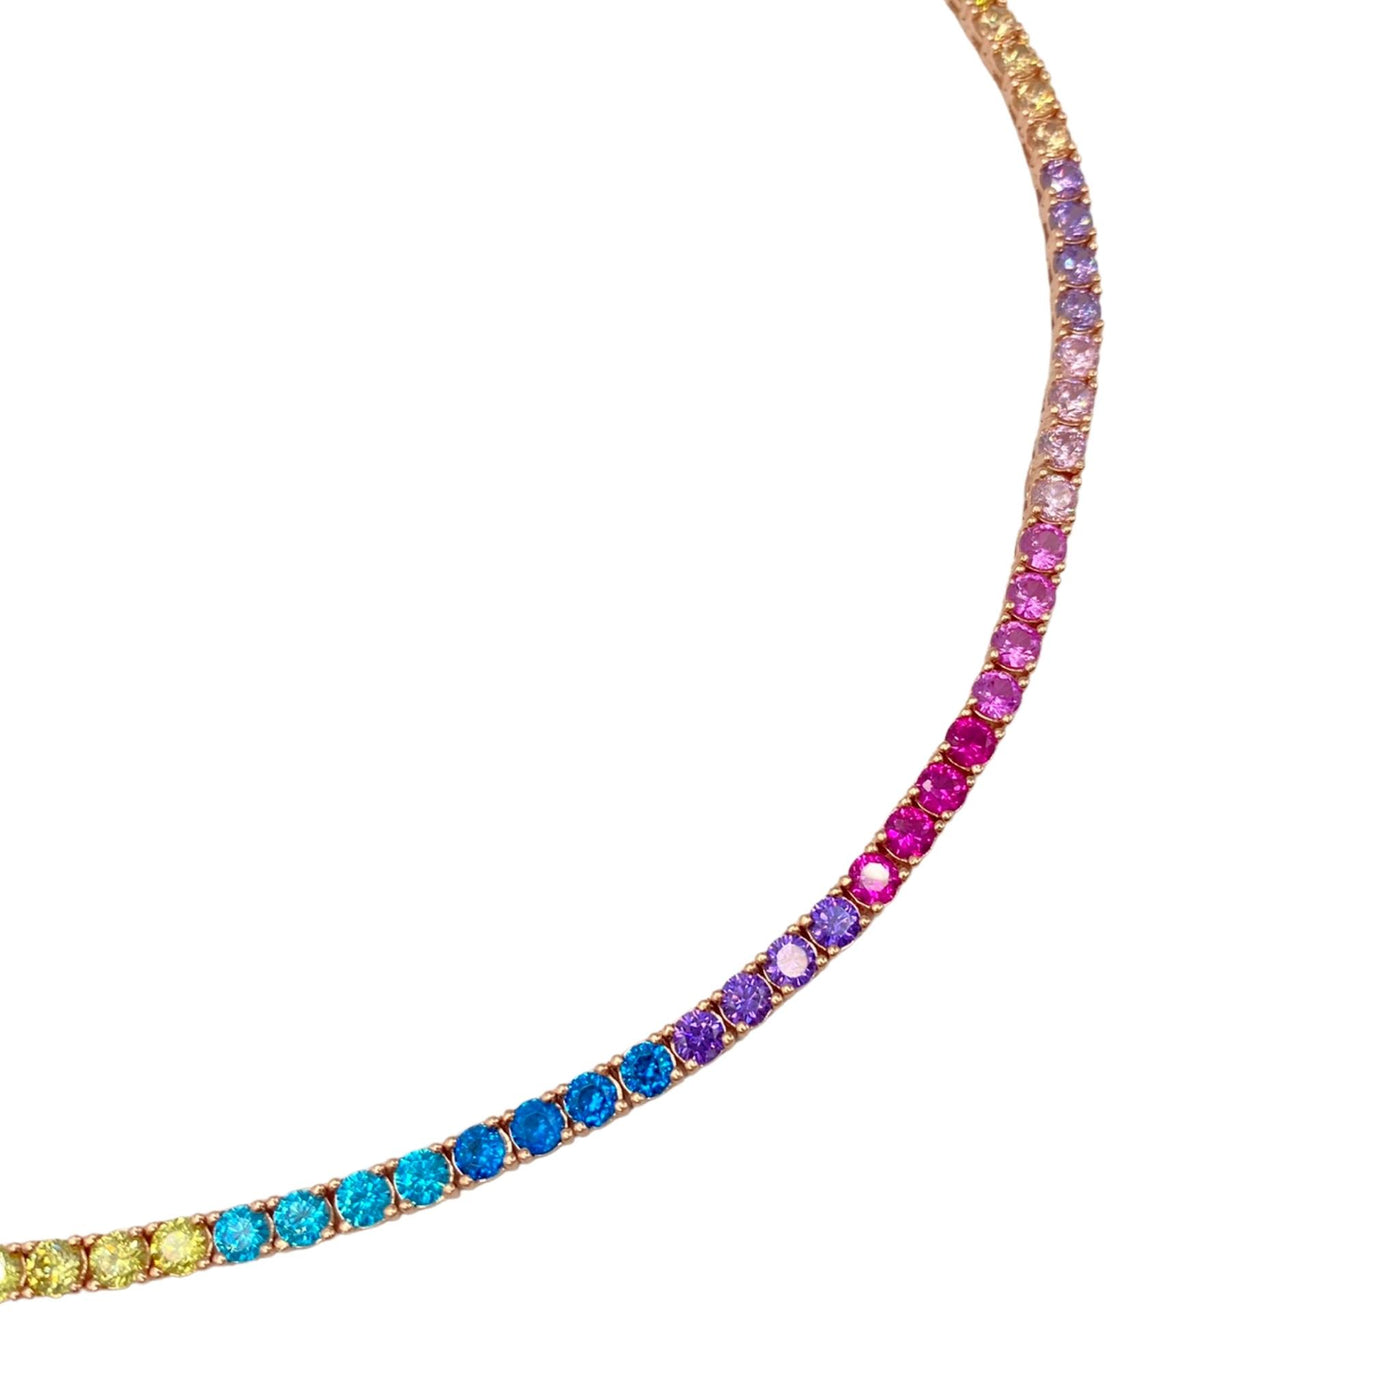 Silver casting tennis necklace with rainbow round stones